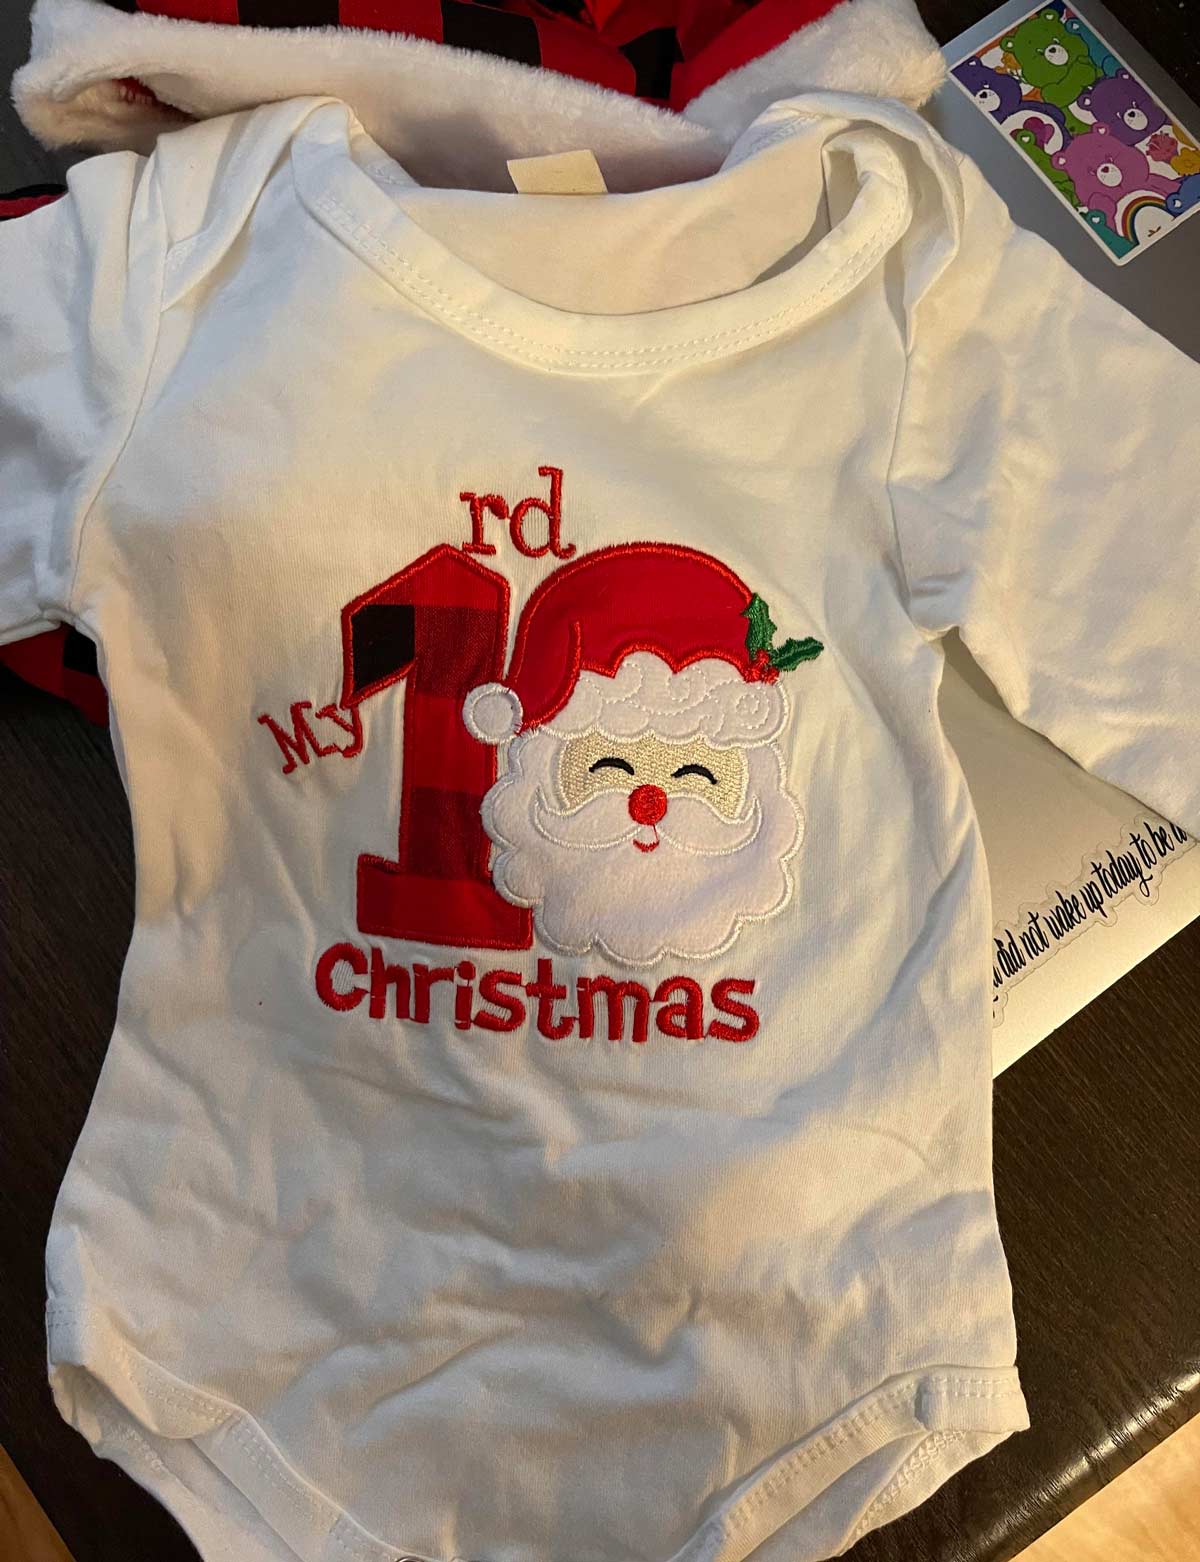 This Christmas onesie I ordered